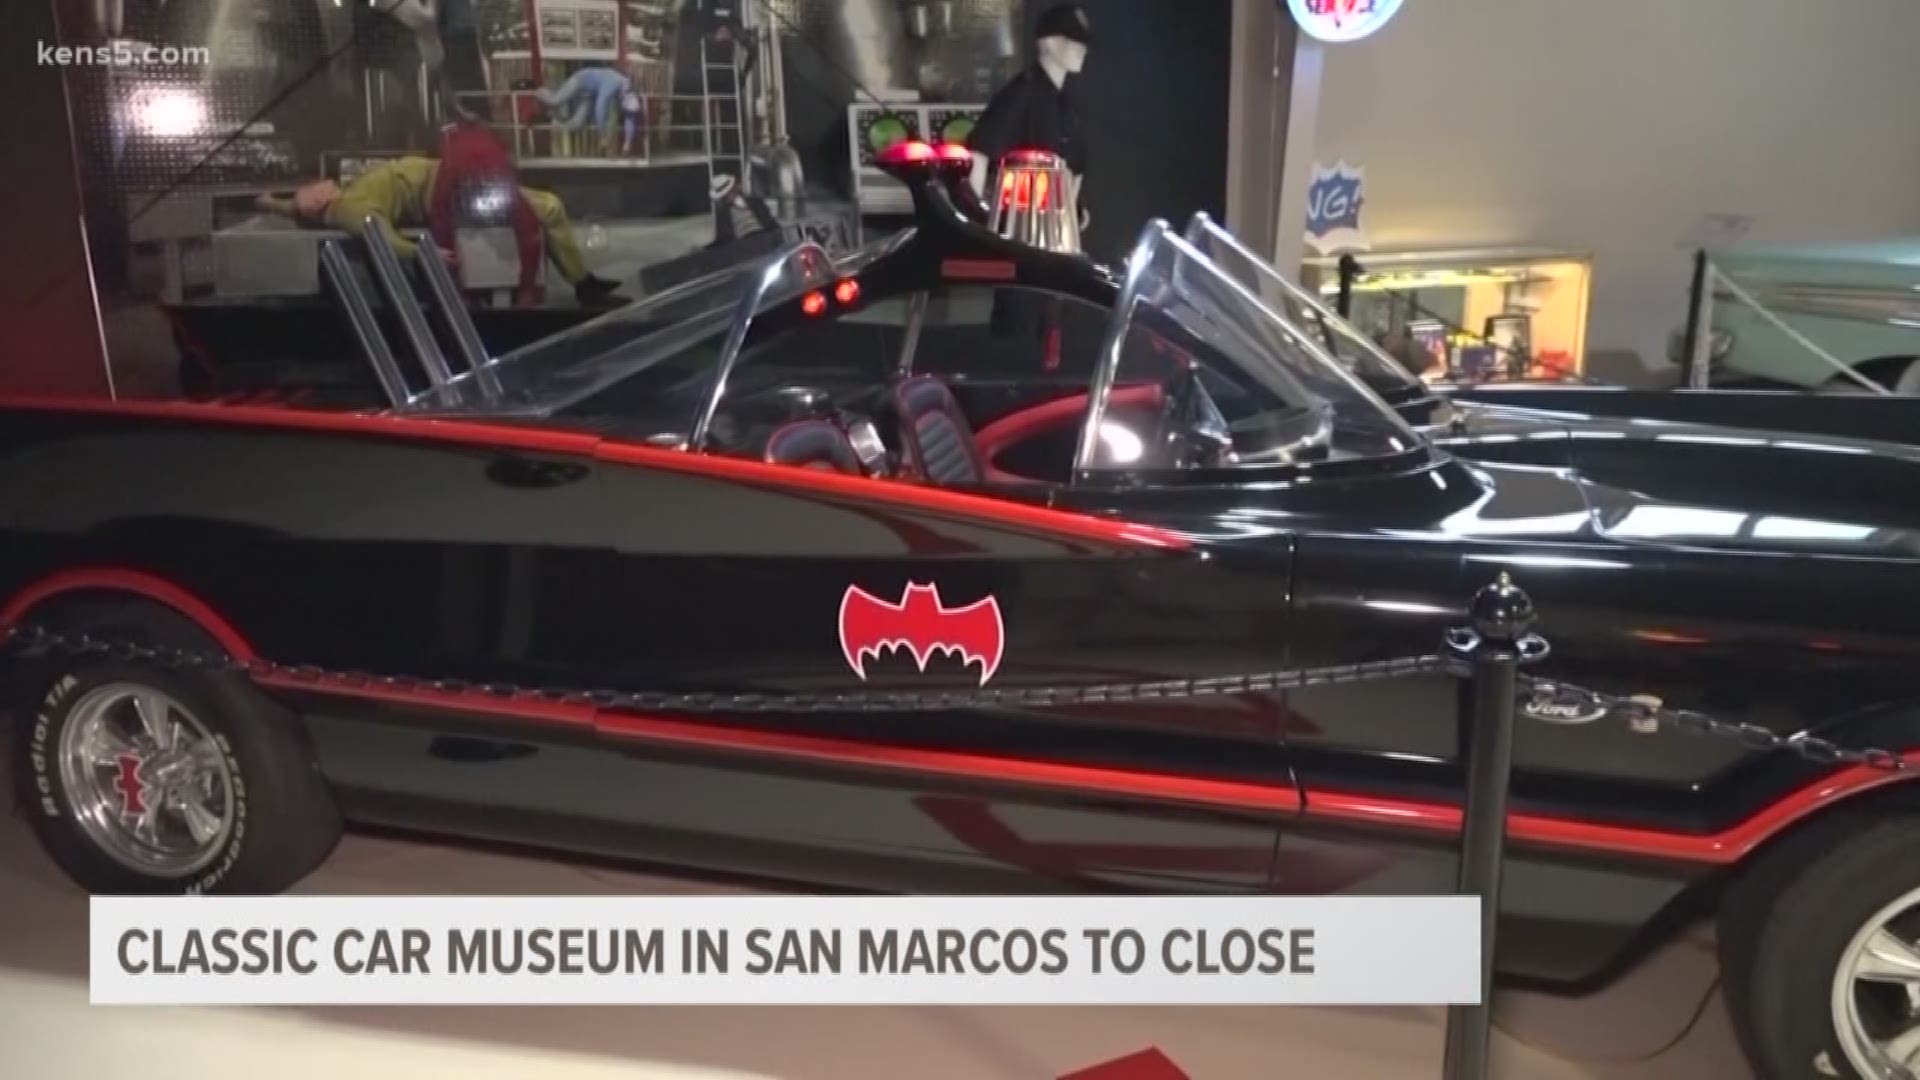 Classic car museum that has sat on I-35 in San Marcos closing after nearly a decade.